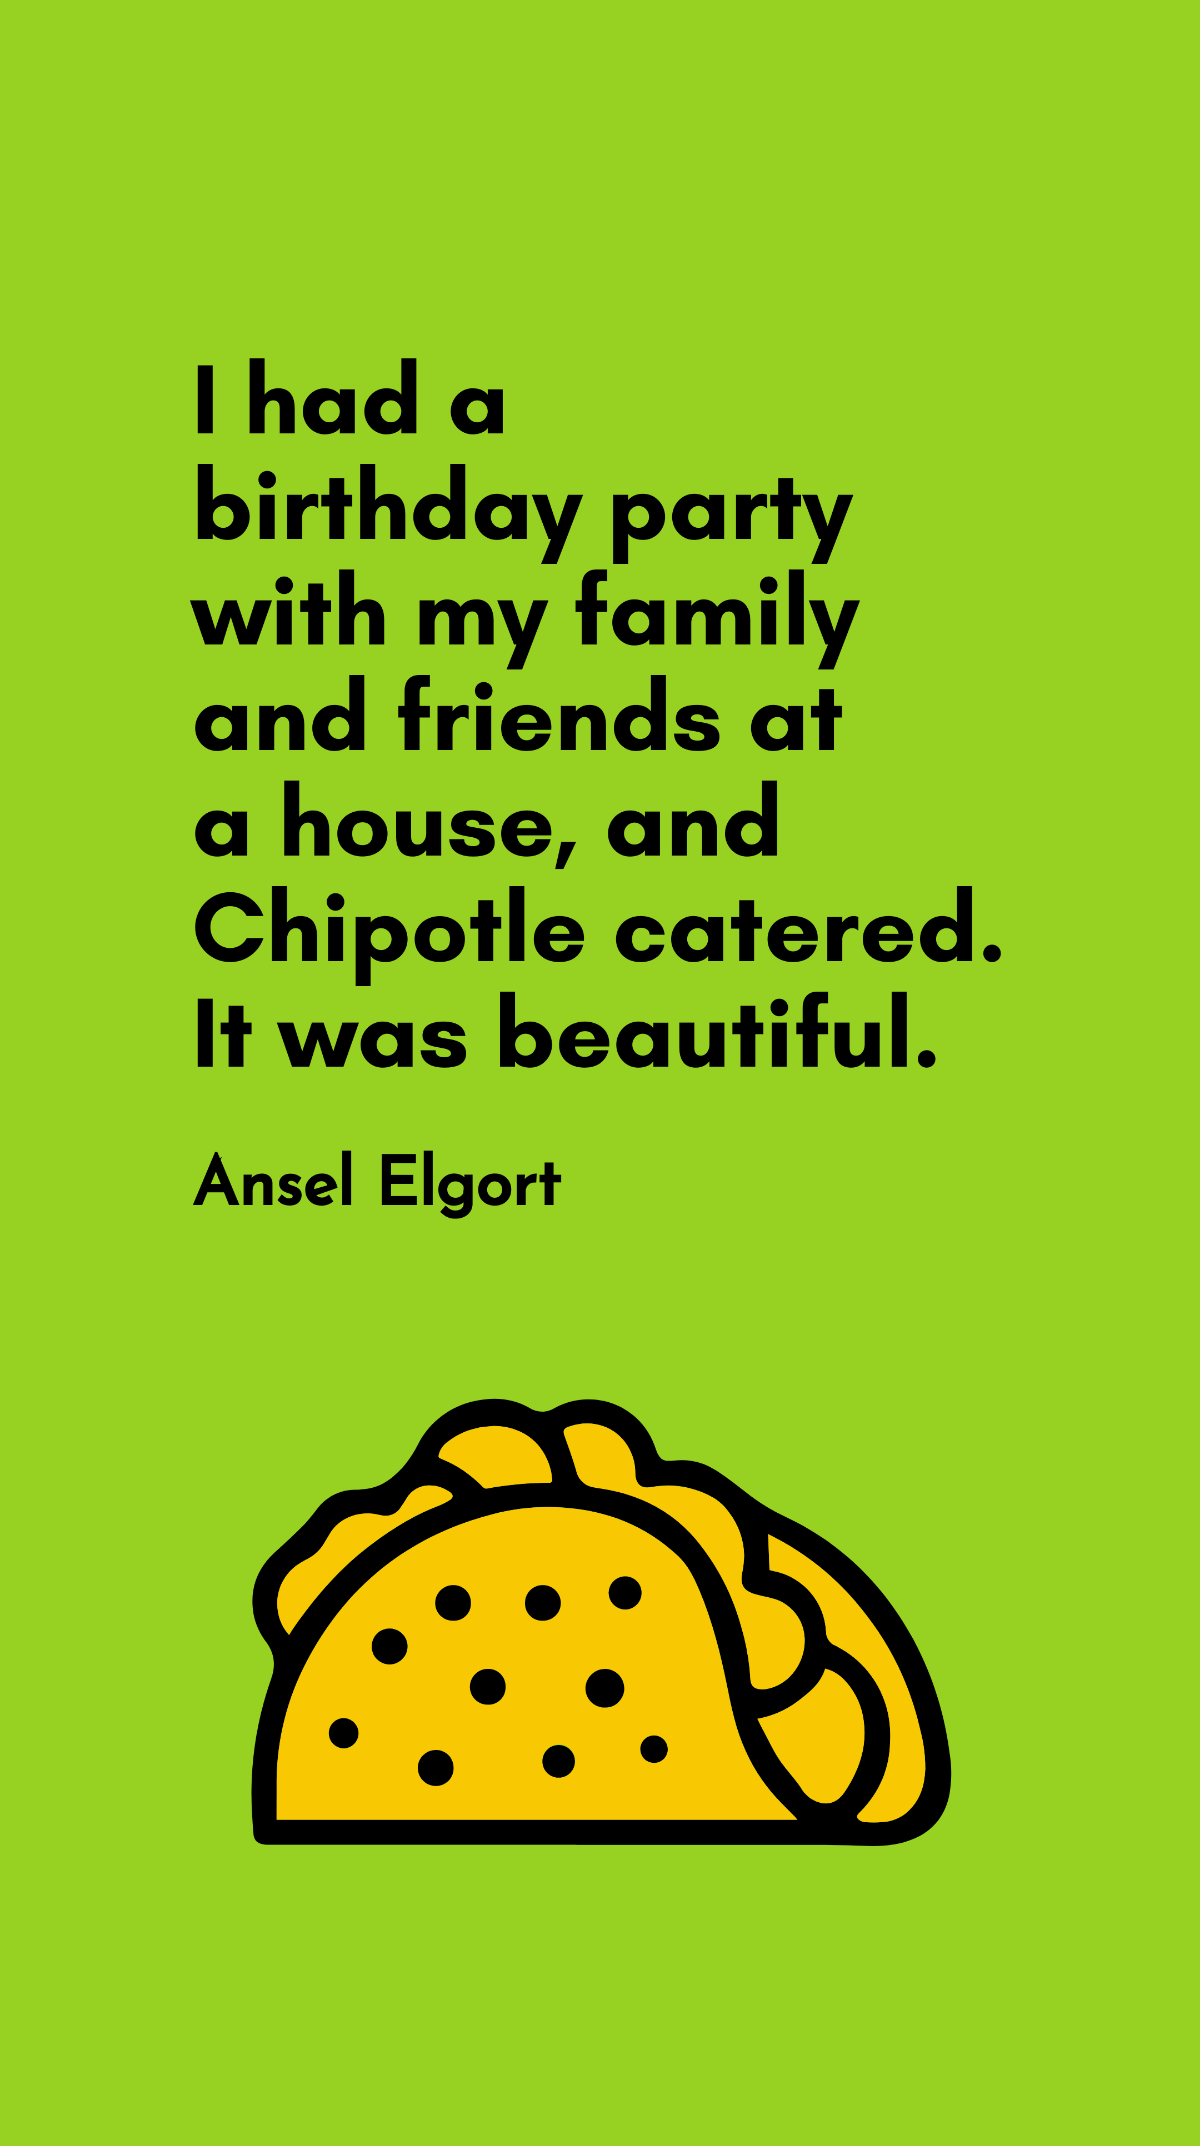 Ansel Elgort - I had a birthday party with my family and friends at a house, and Chipotle catered. It was beautiful. Template